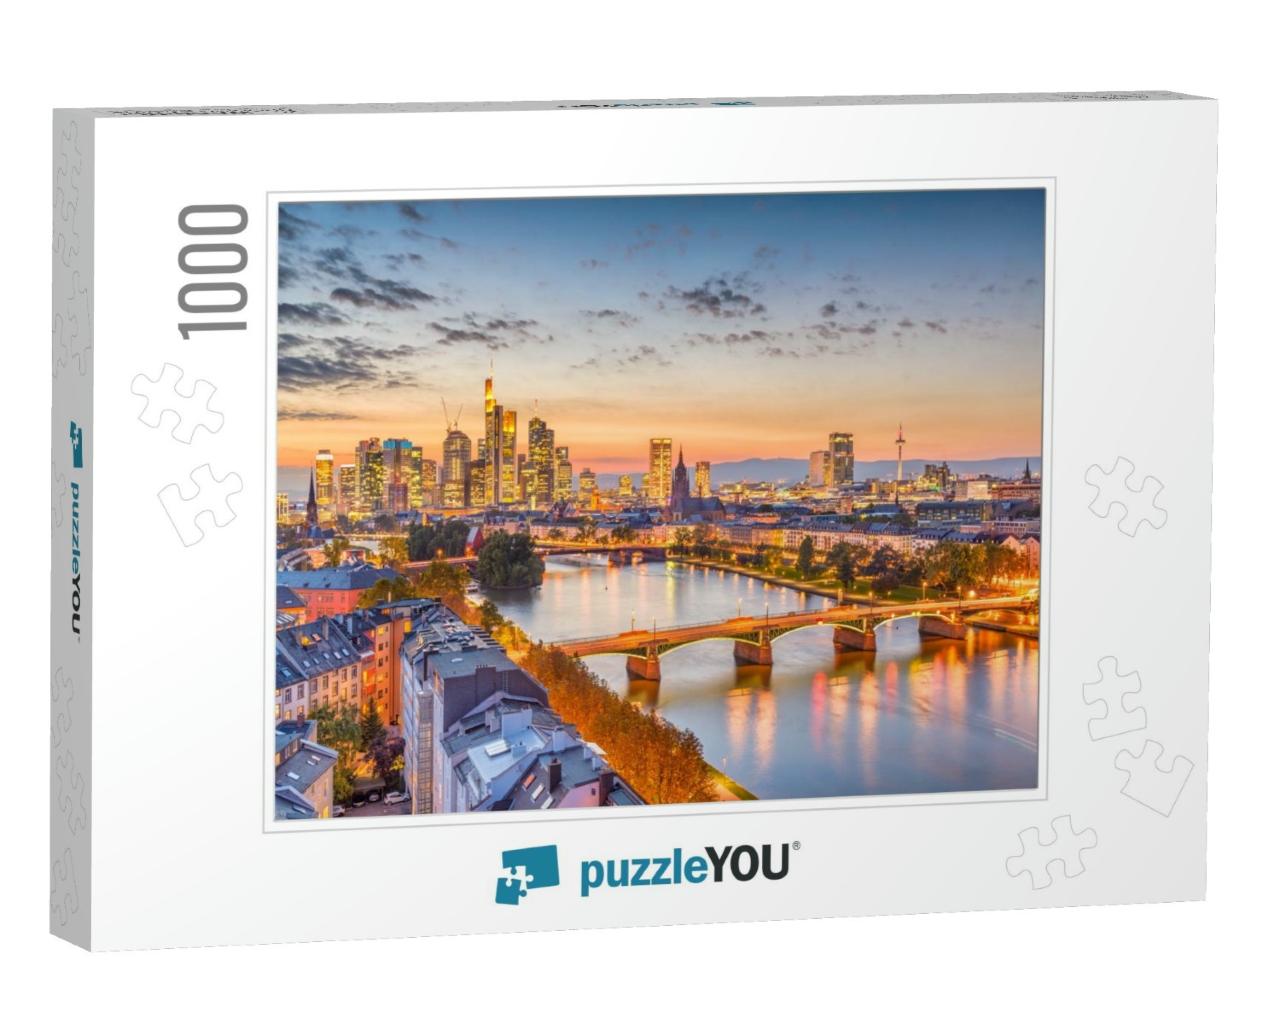 Frankfurt, Germany Skyline Over the Main River... Jigsaw Puzzle with 1000 pieces